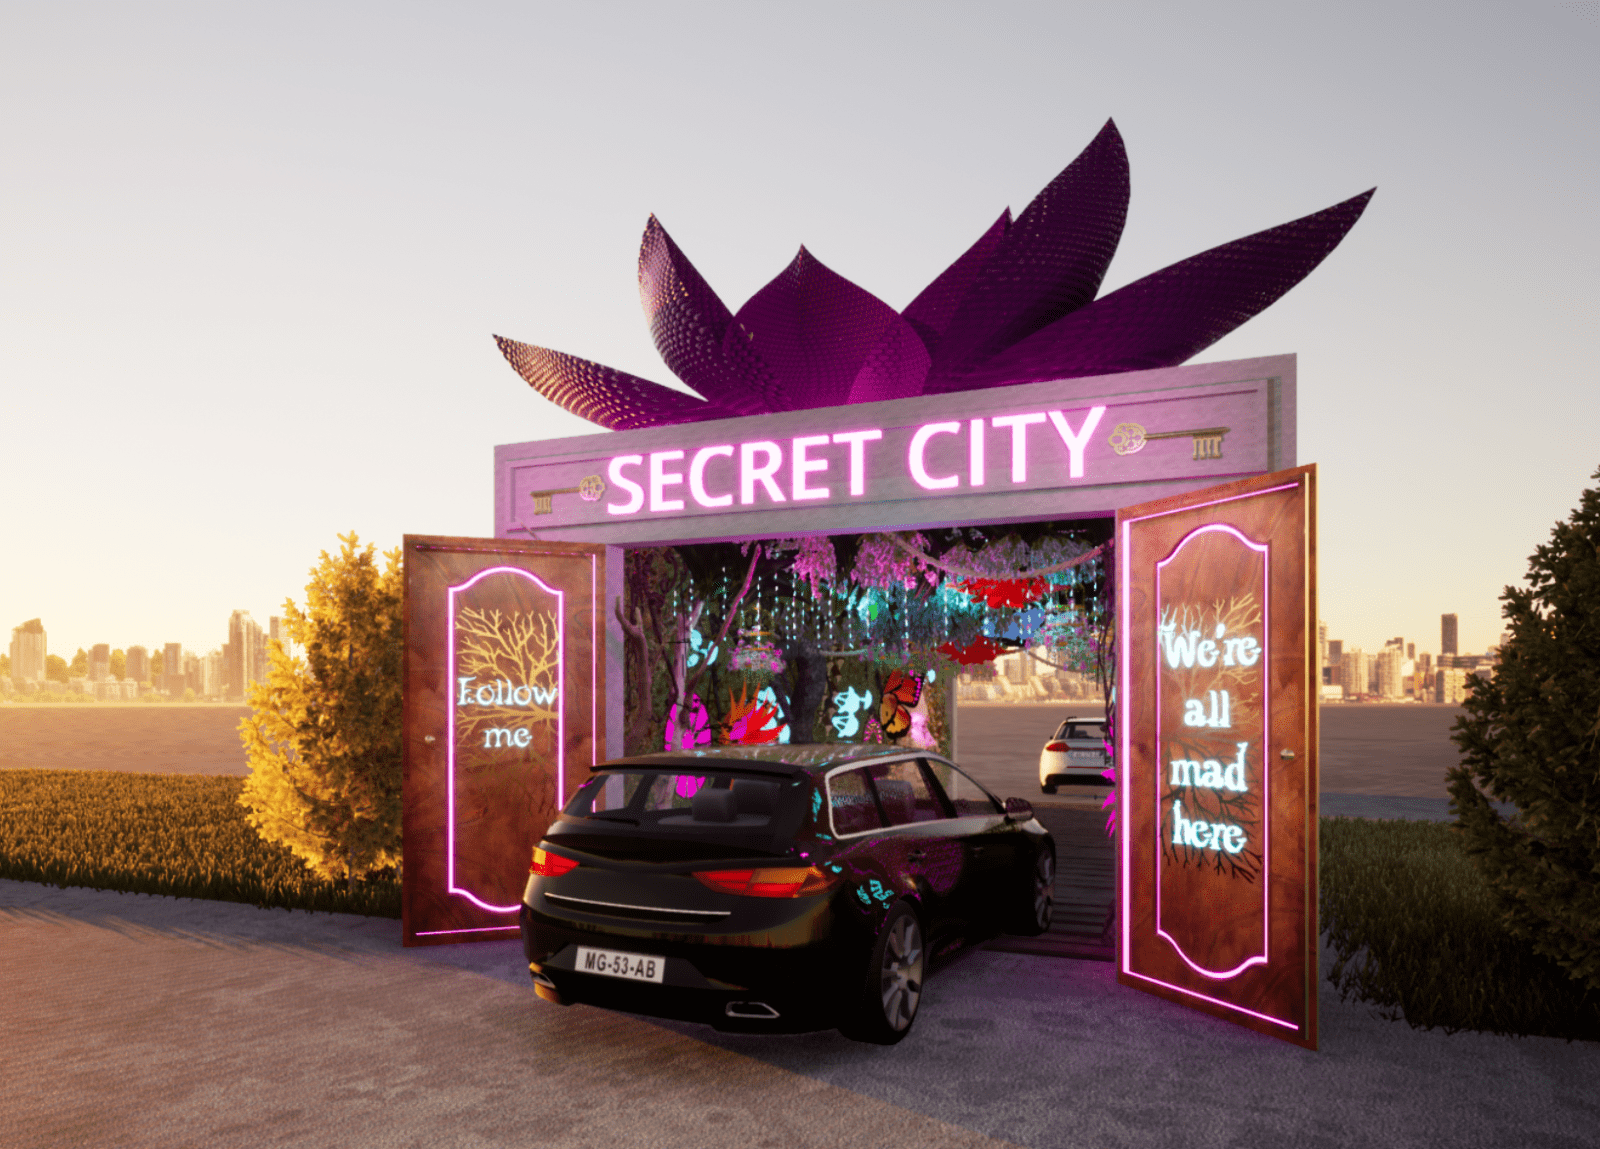 Immersive drive-in cinema entertainment is returning to Manchester next month, The Manc